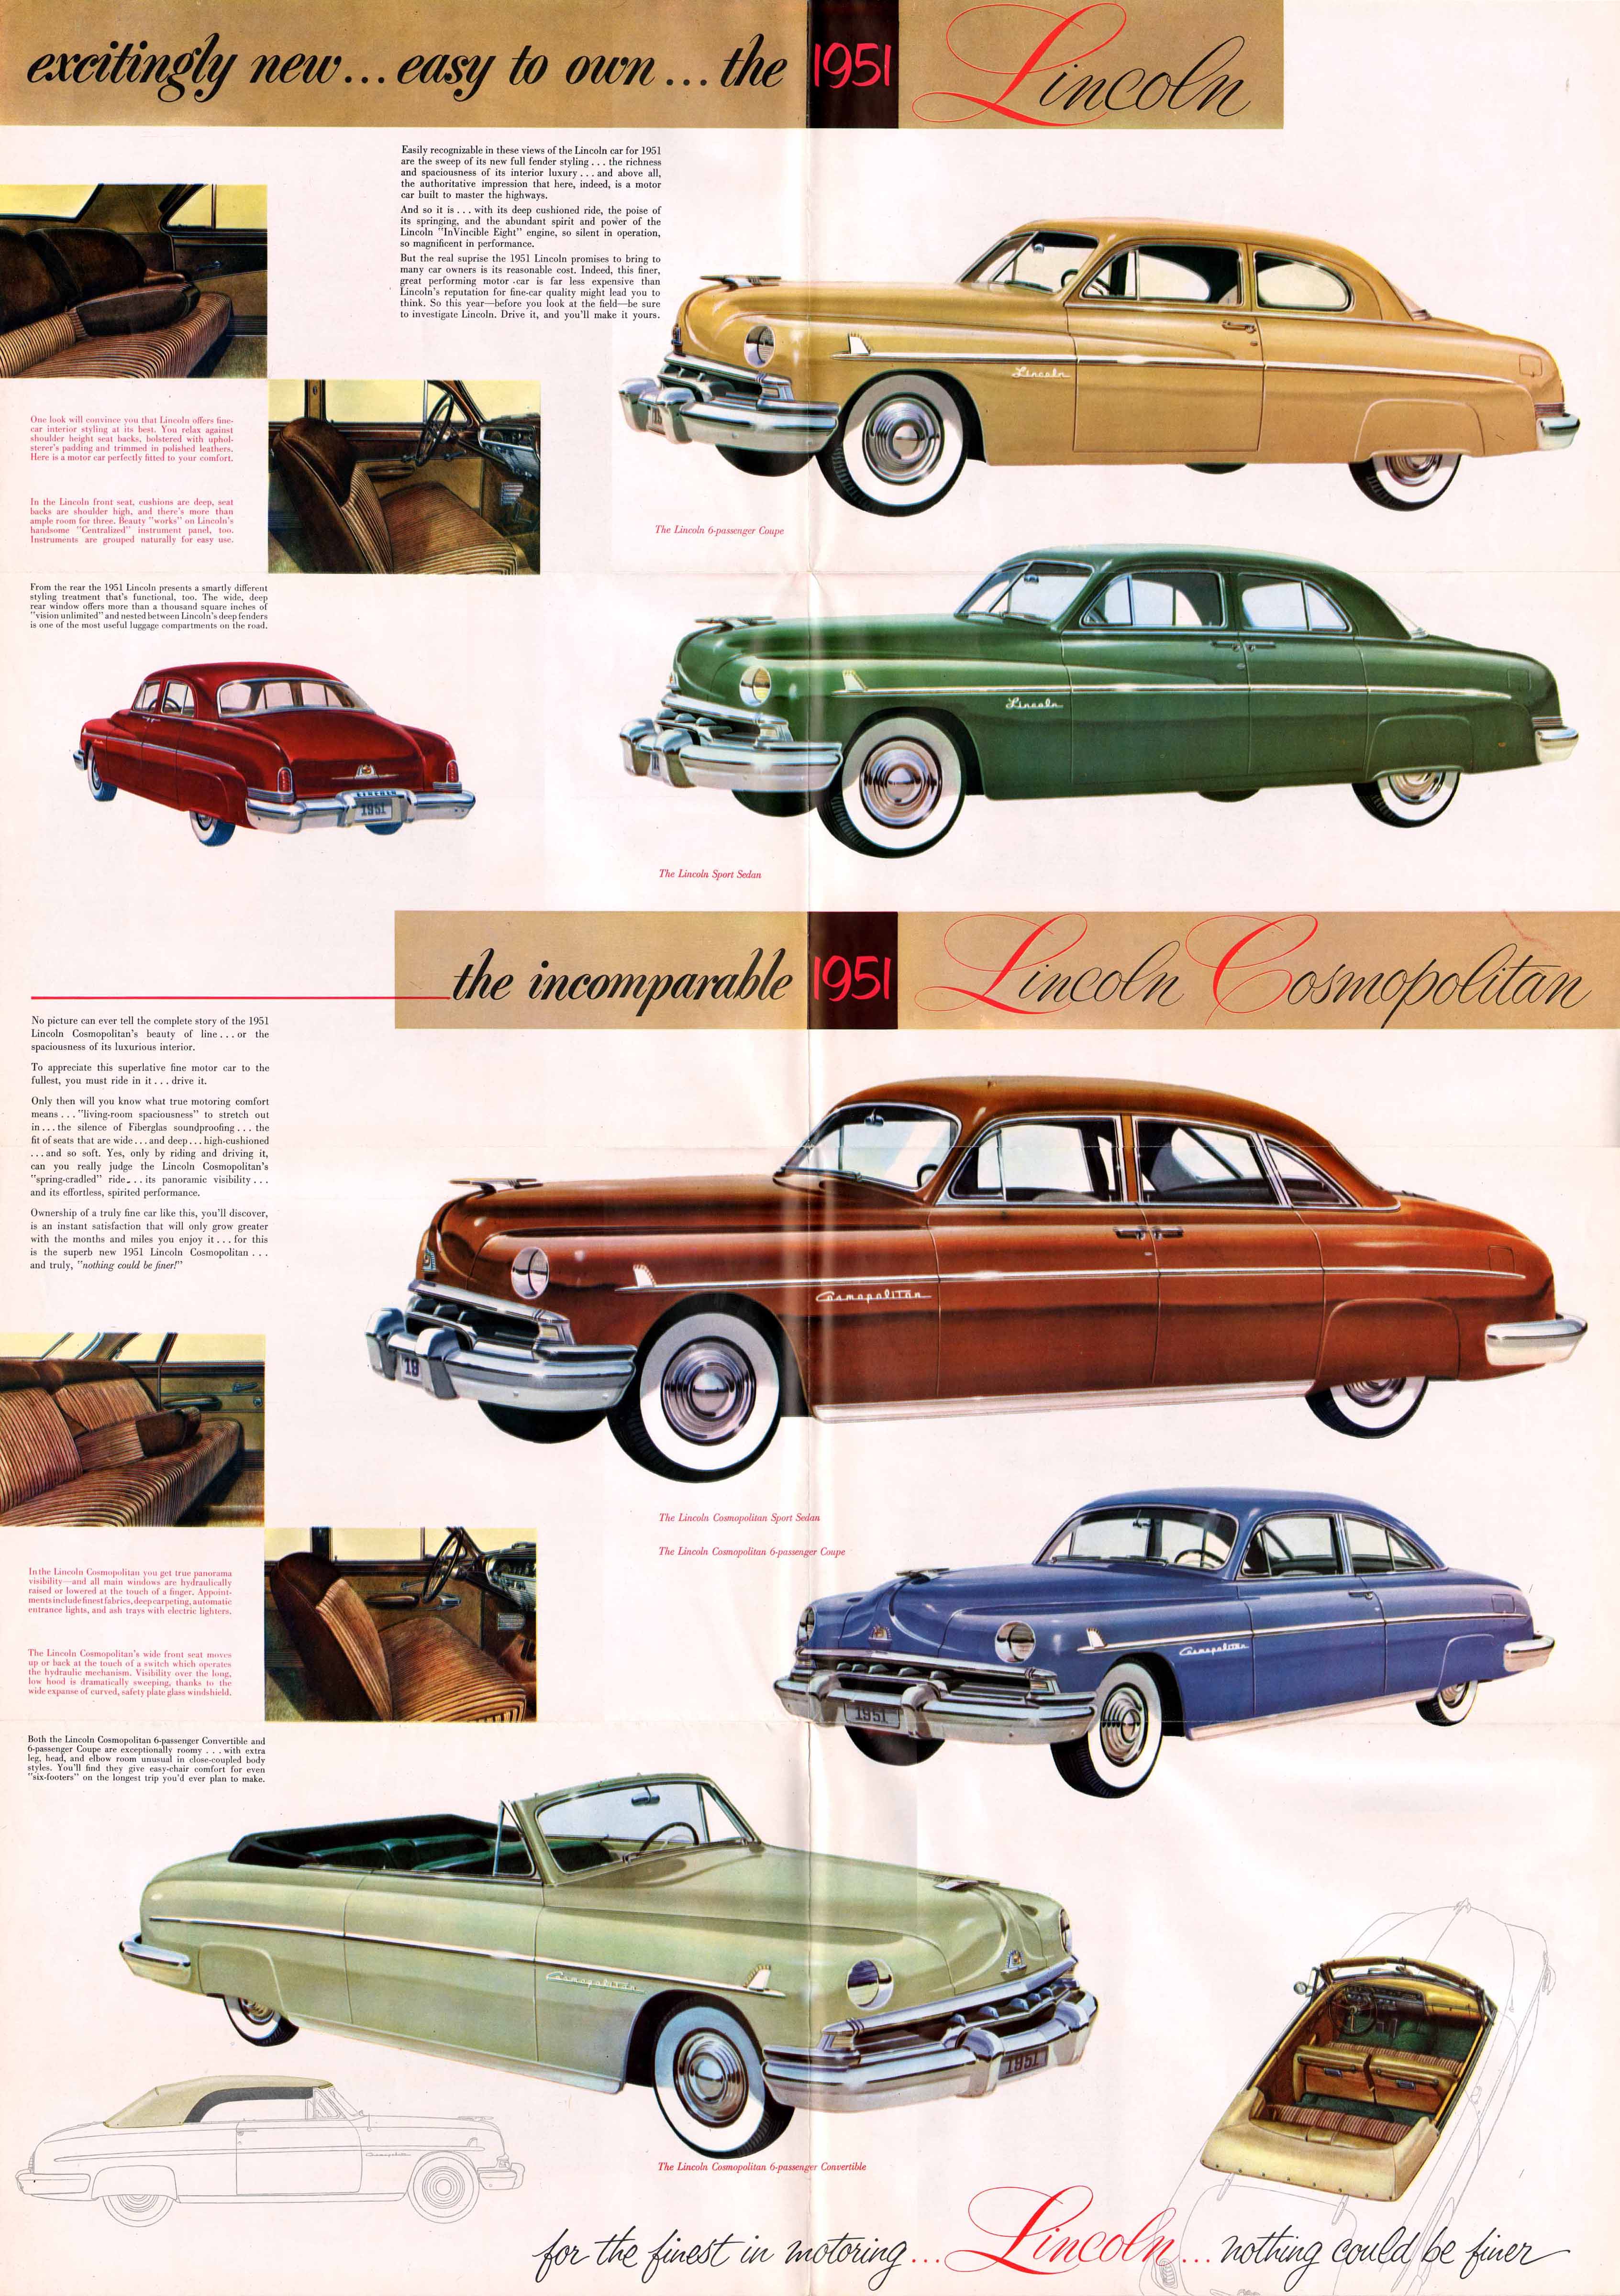 1951_Lincoln_Foldout-08-09-10-11-12-13-14-15